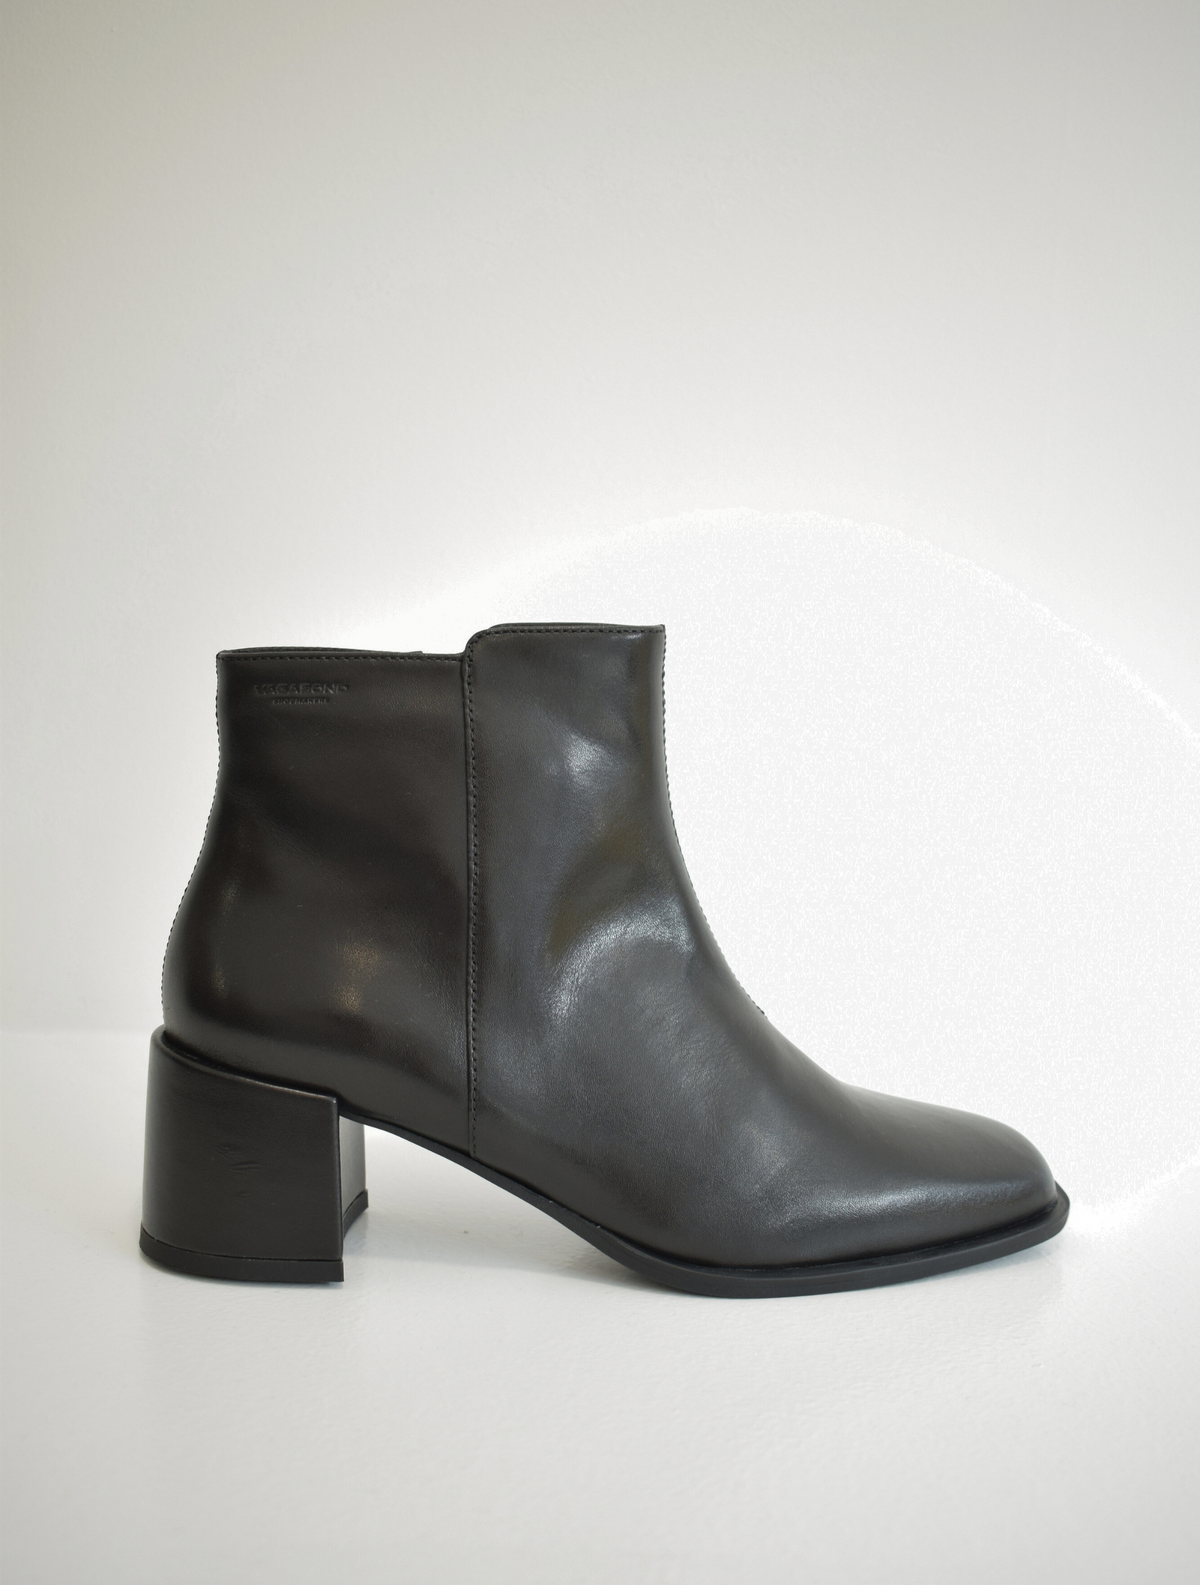 Black ankle boot with leather wrapped block heel and zip fastening